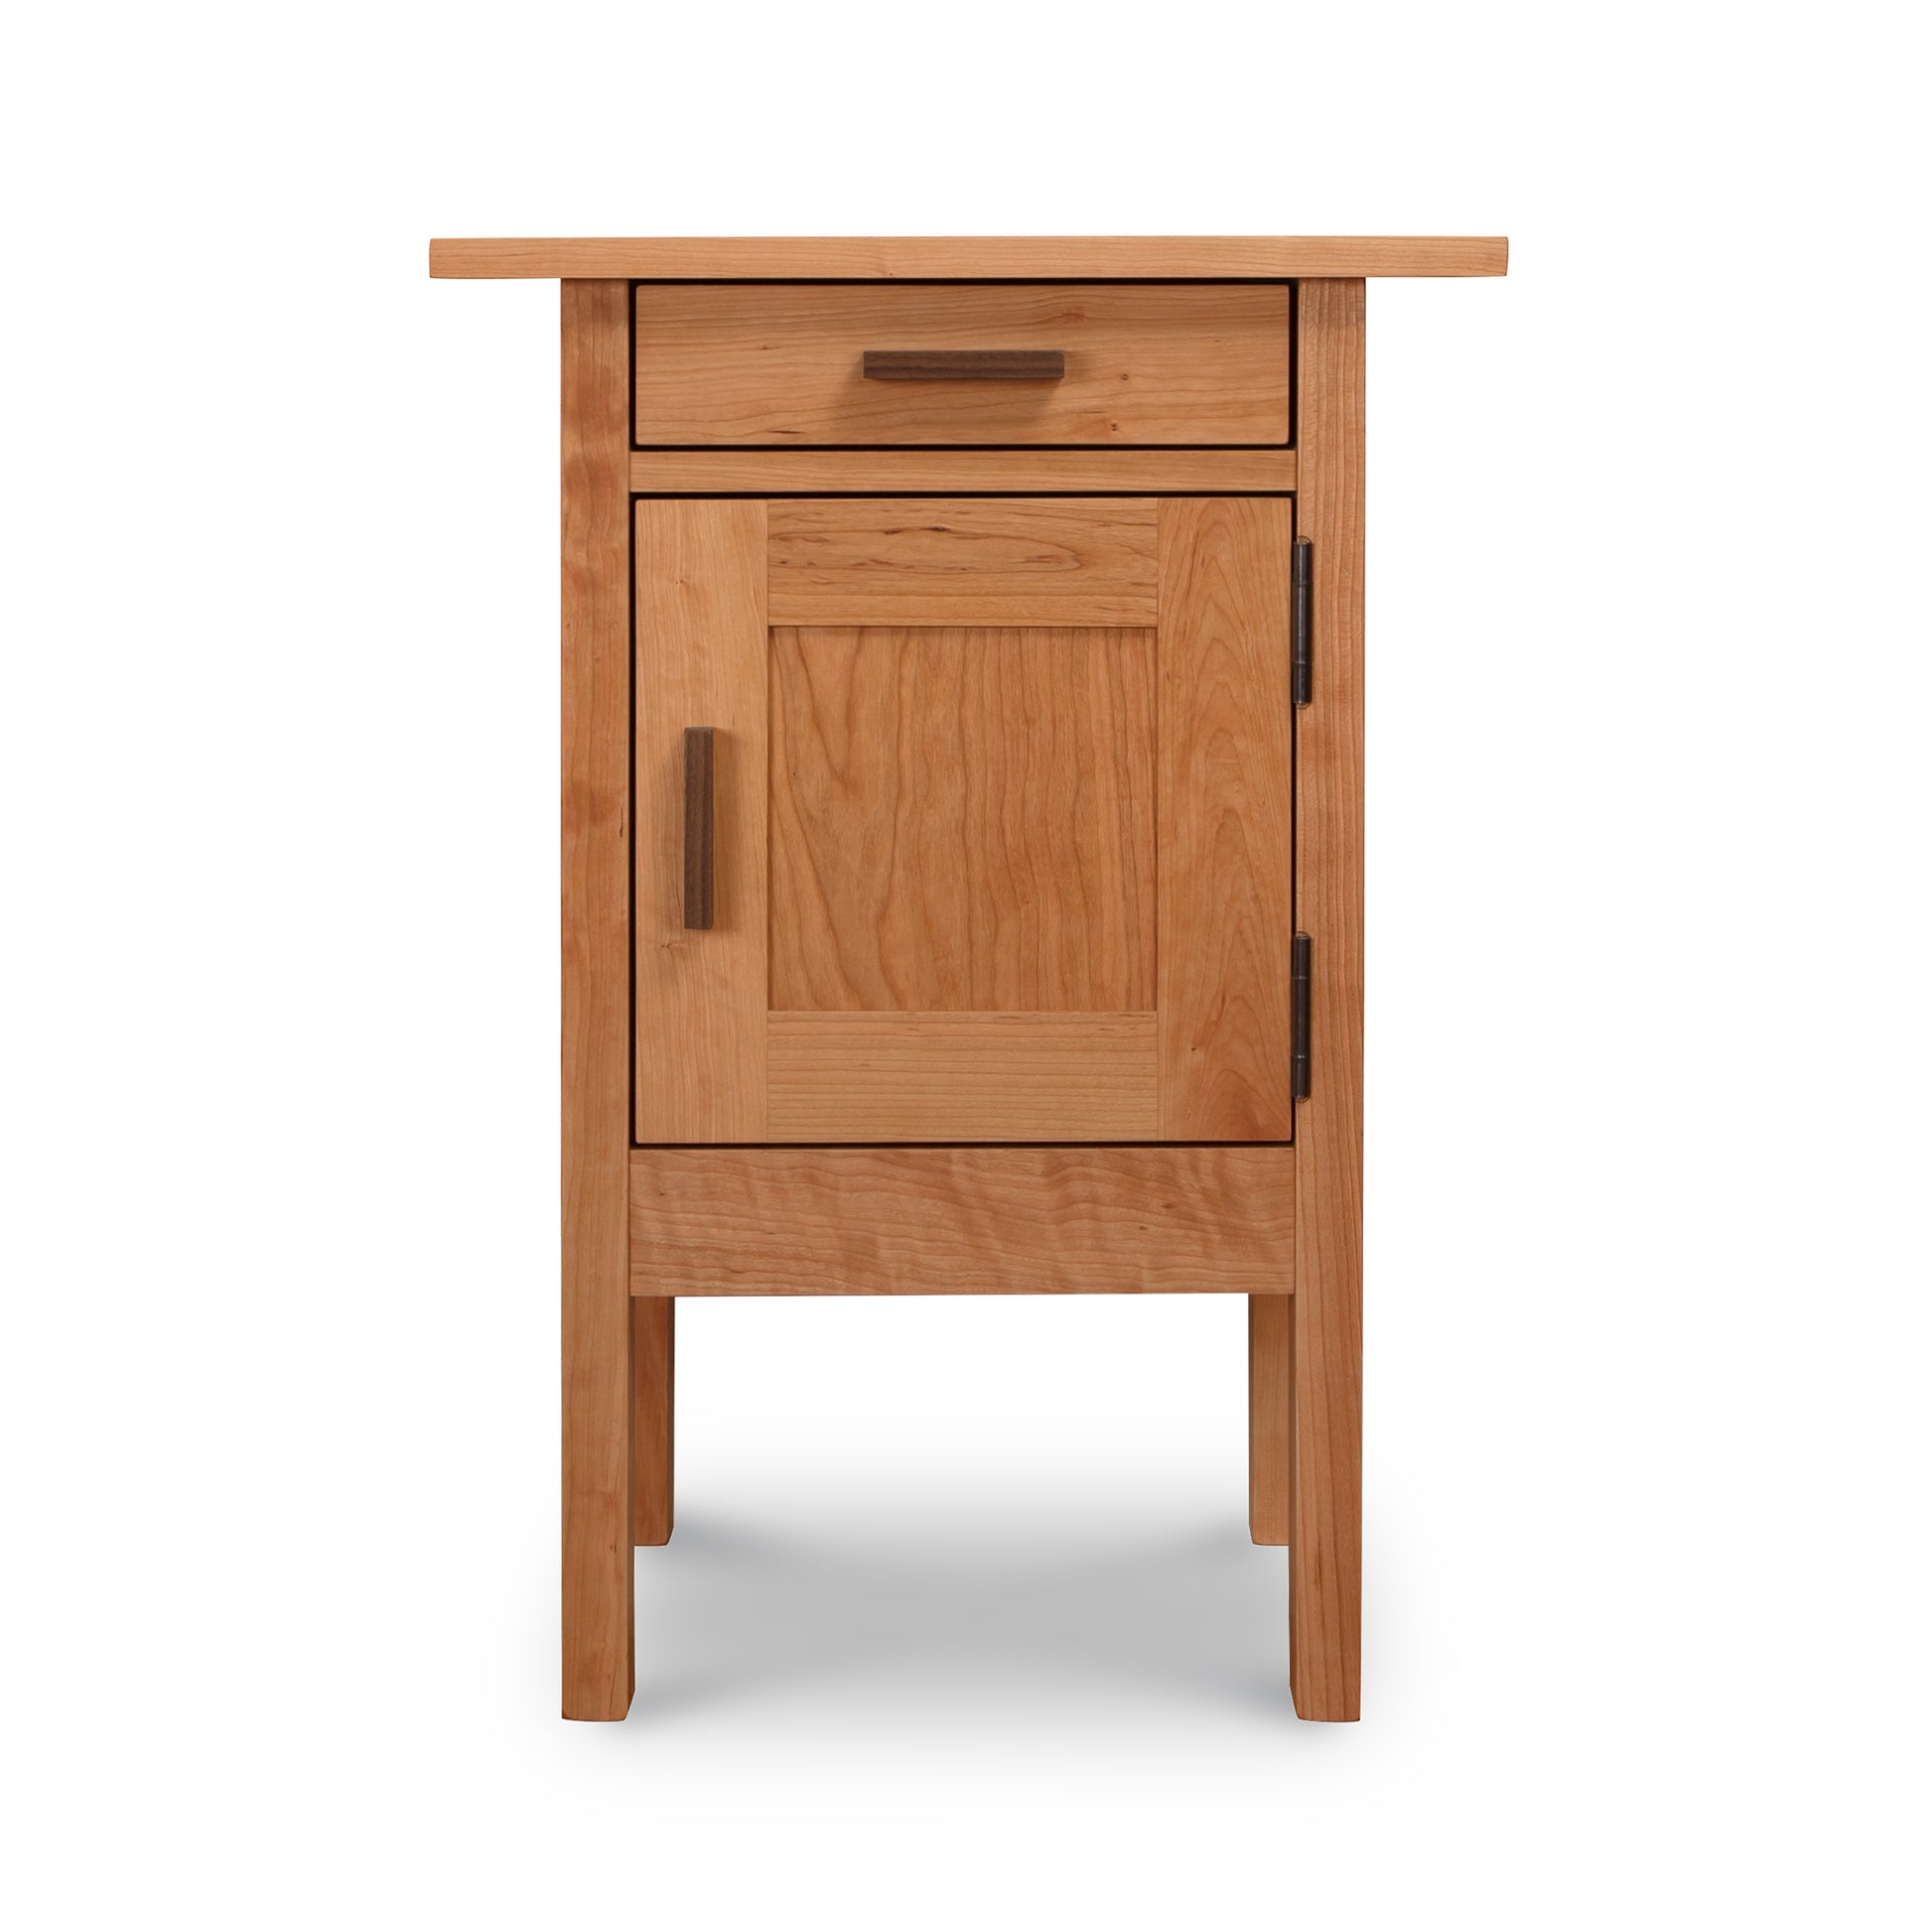 A small wooden Modern Craftsman 1-Drawer Nightstand with Door, crafted in the Vermont Furniture Designs style.